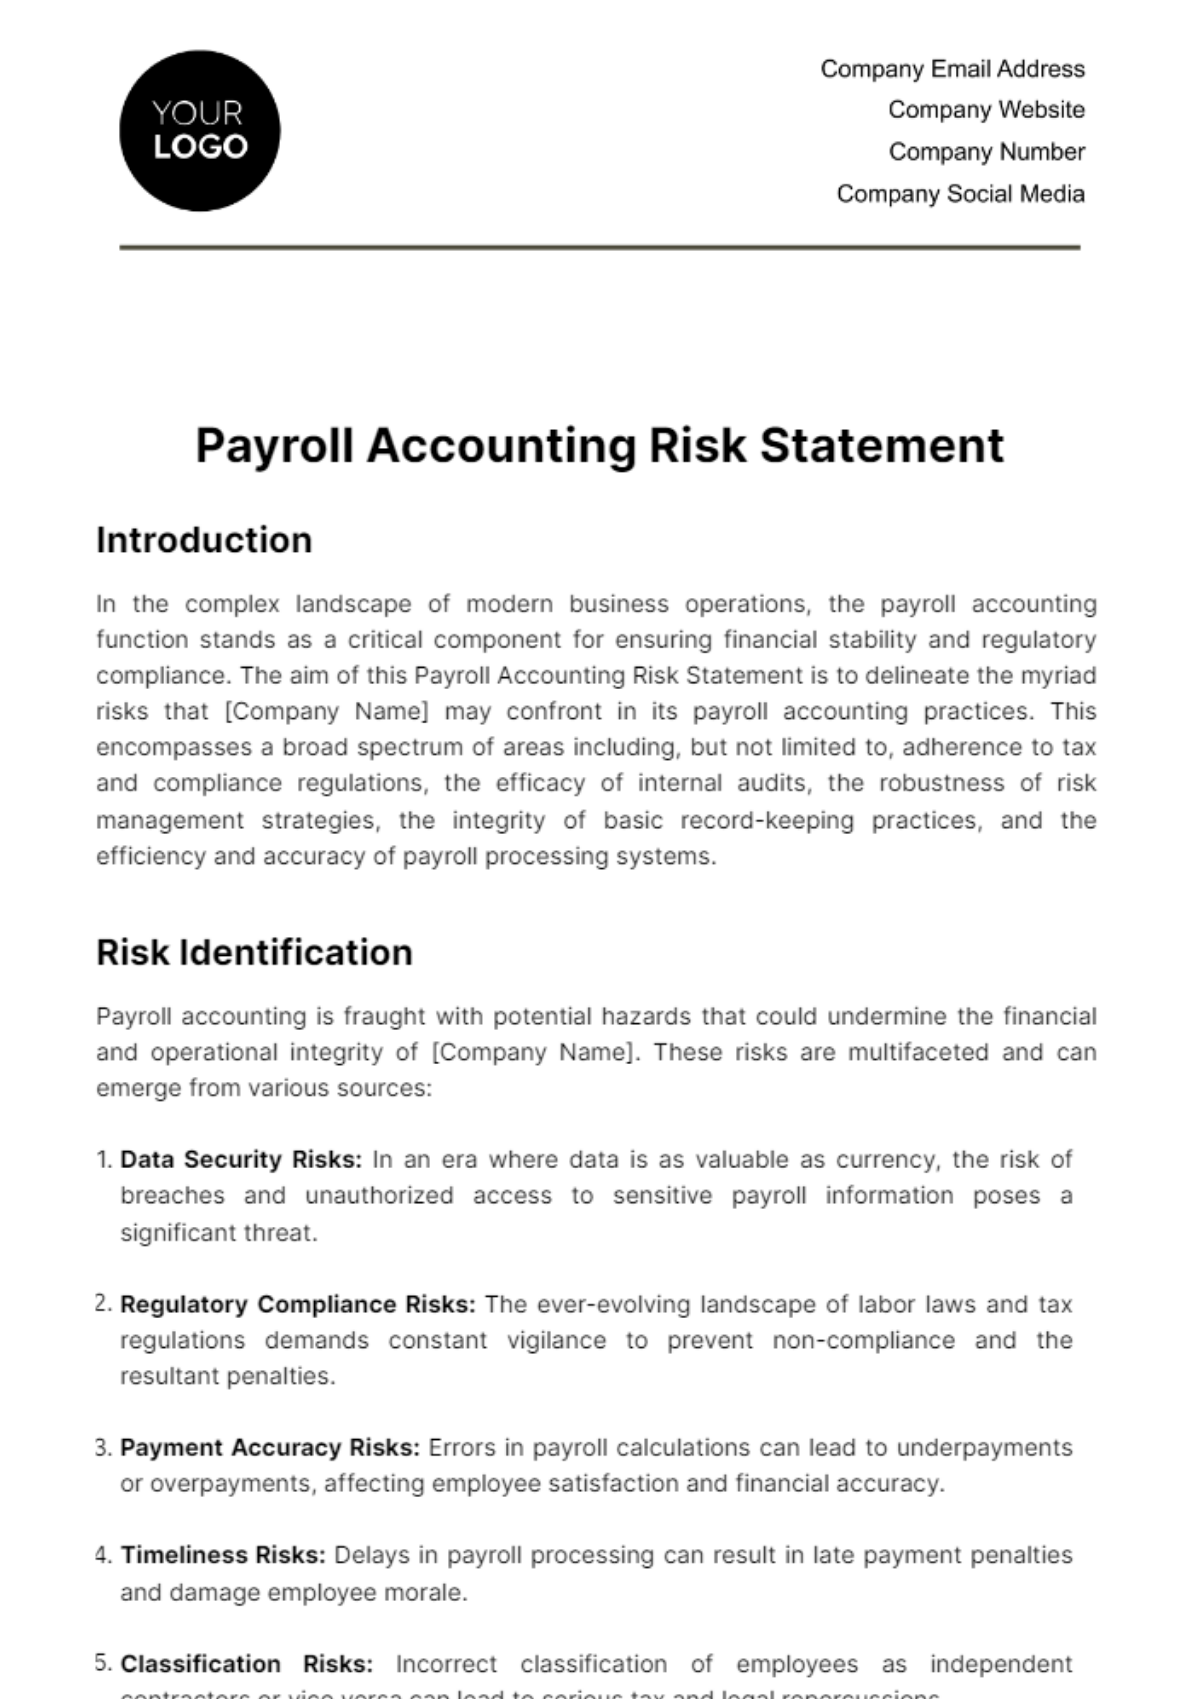 Free Payroll Accounting Risk Statement Template